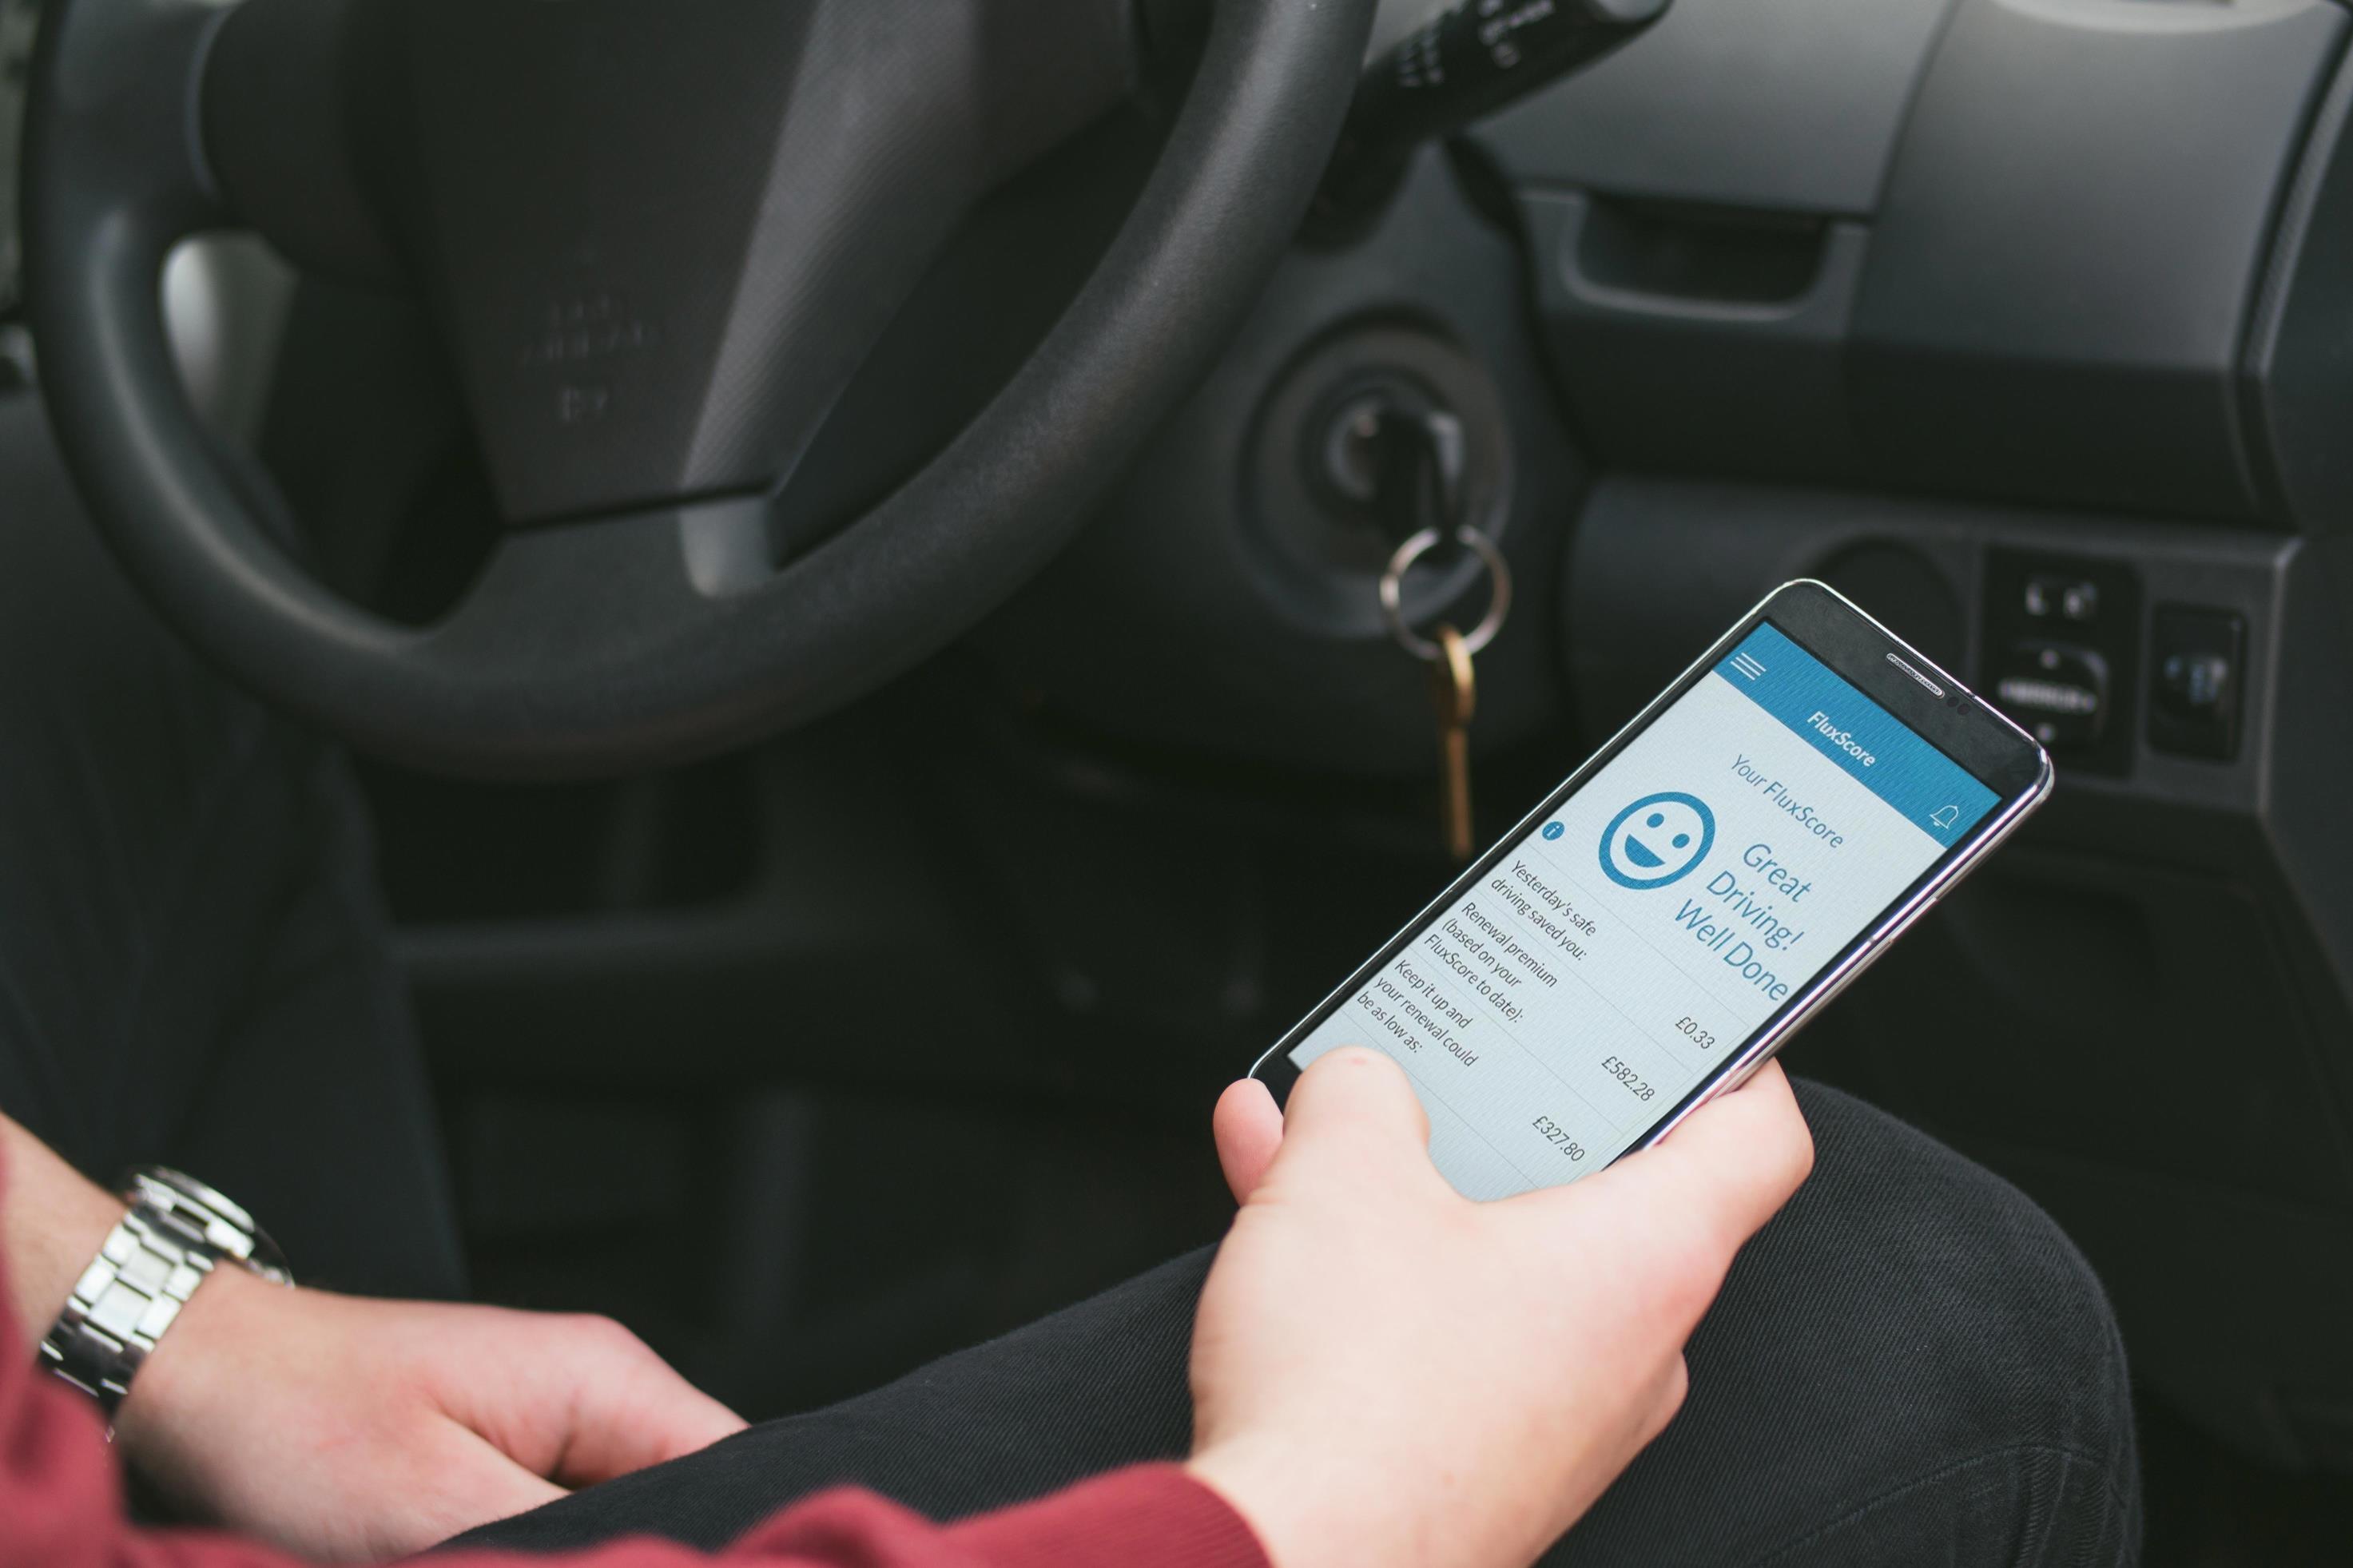 When driving, when should you listen to a voicemail on your phone?